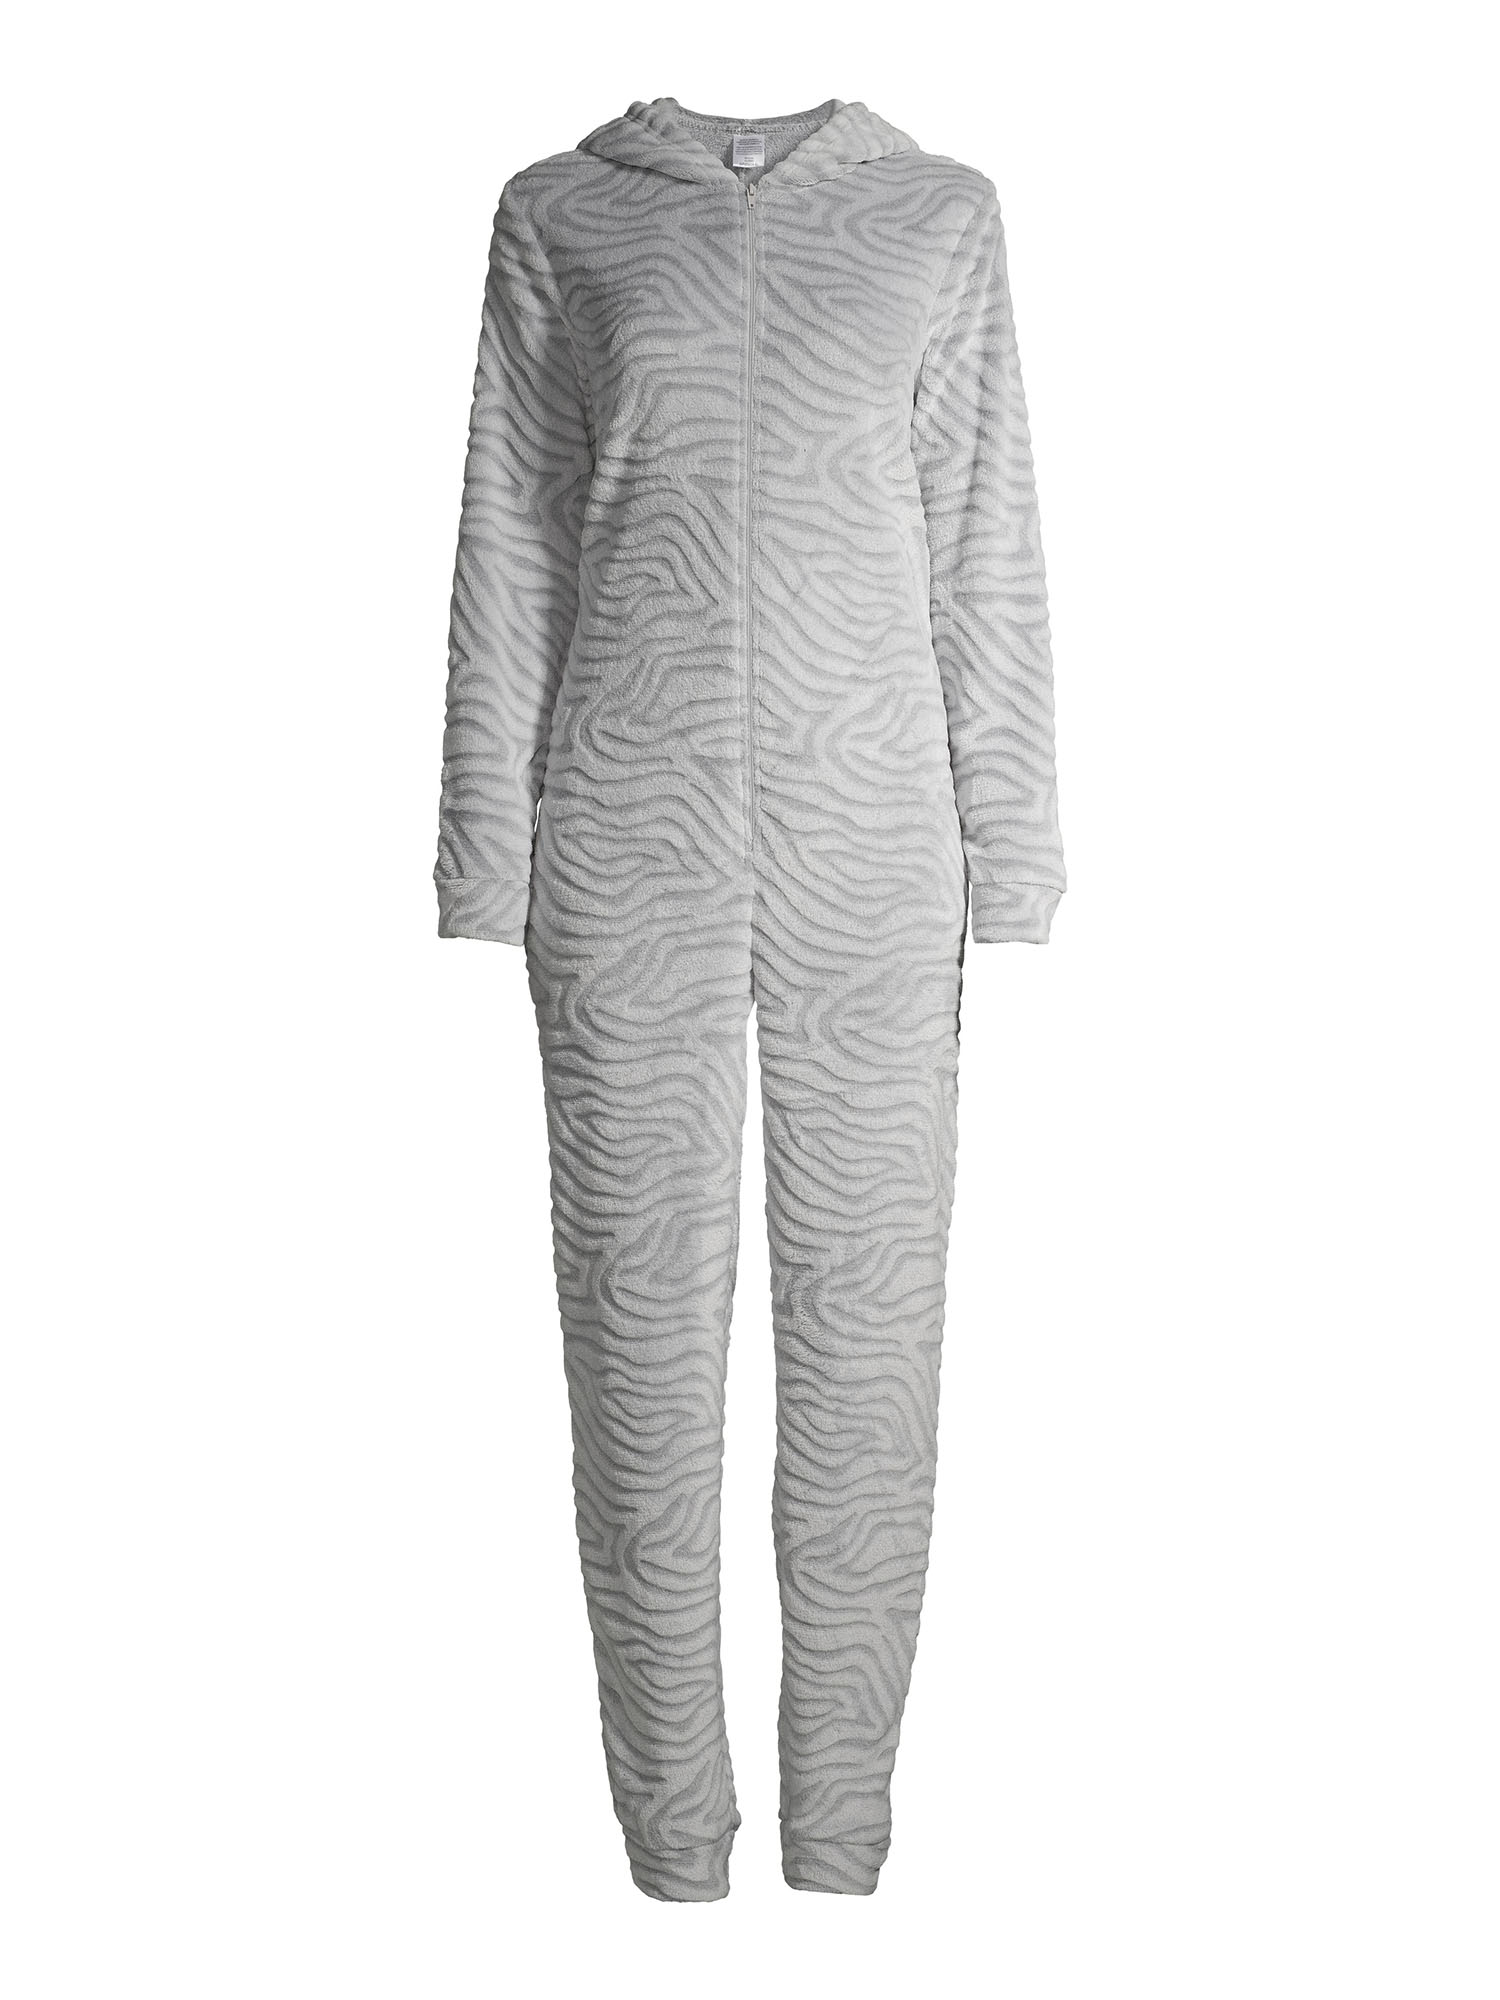 George Women's Character Pajama Union Suit - image 2 of 6